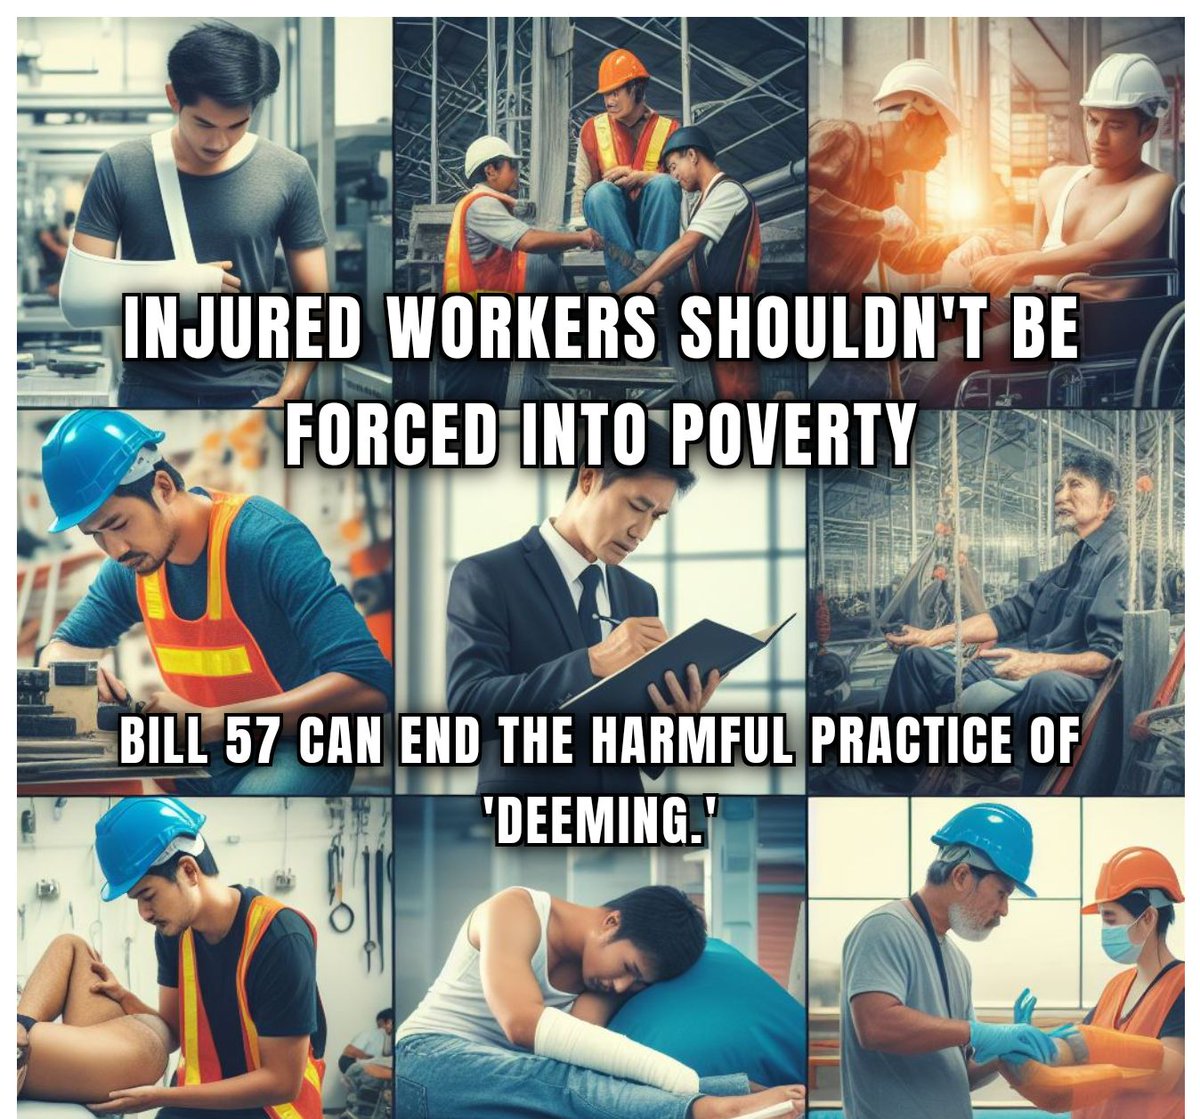 #Injuredworkers shouldn't be forced into poverty. Bill 57 can end the harmful practice of deeming and create a fairer system for all. Let's support our injured workers! #WorkersRights #EndPoverty #wsib #wcb 
buff.ly/3WGsD9p